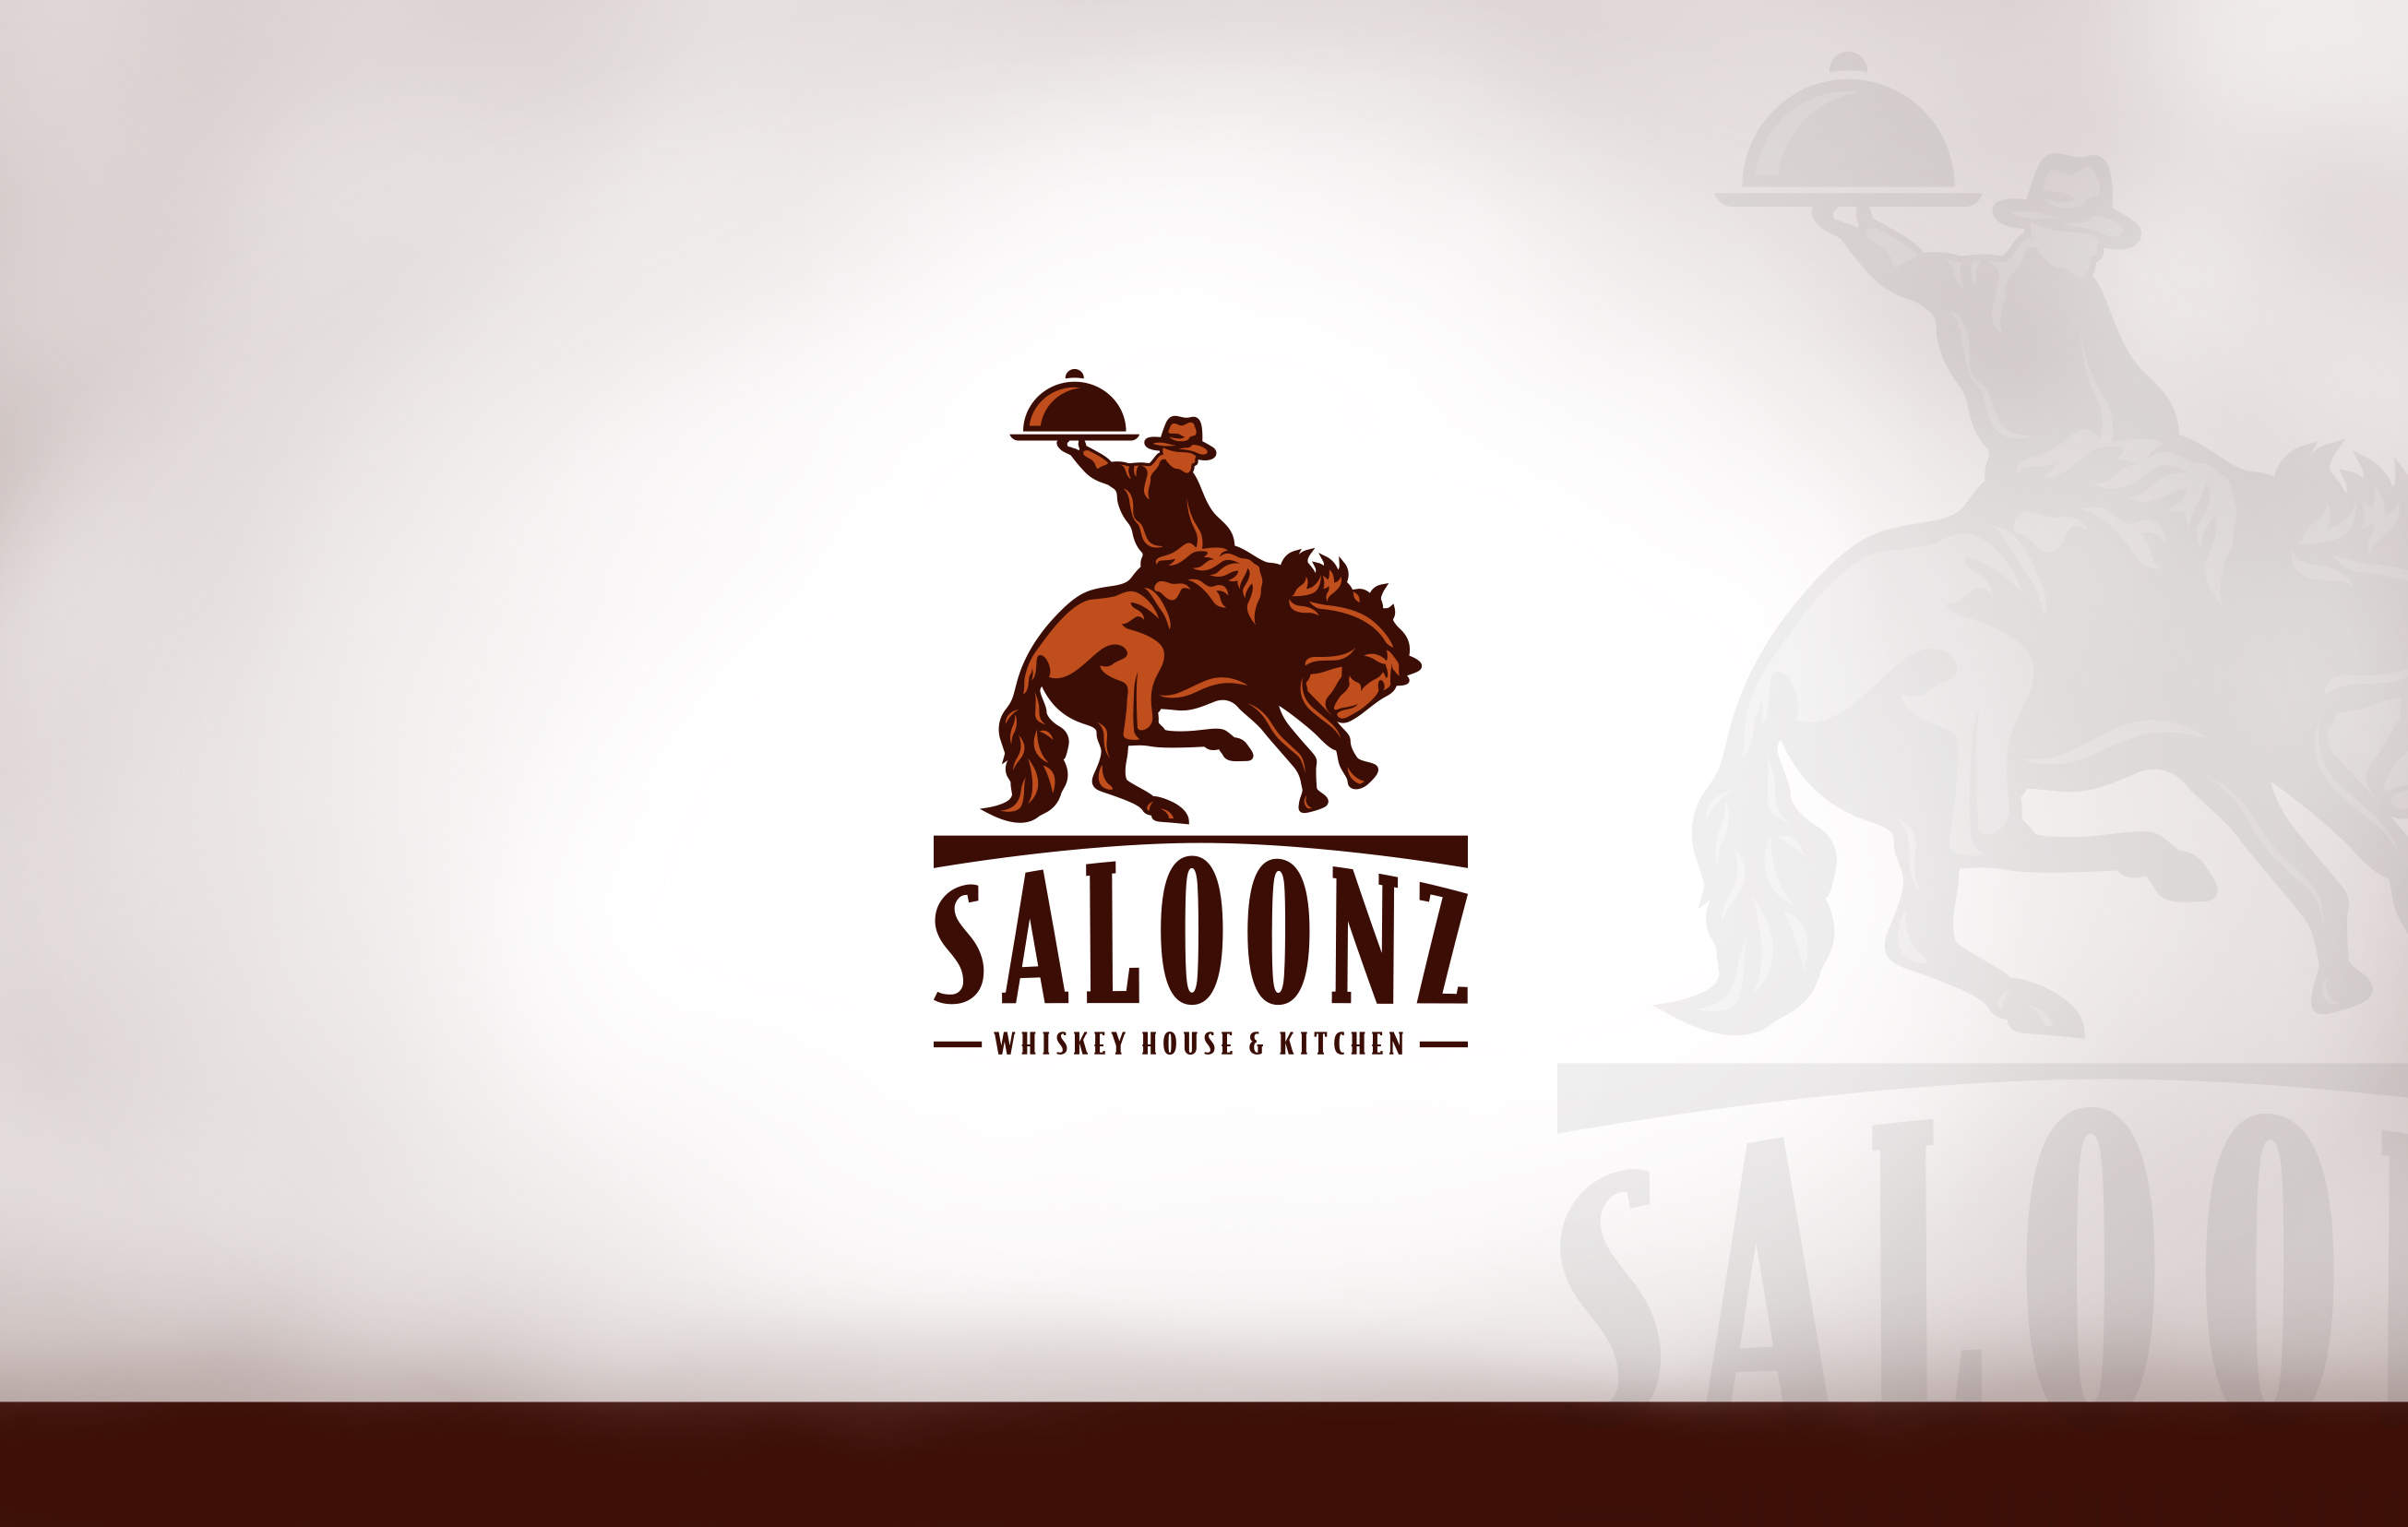 Saloonz Whiskey House and Kitchen Design #1